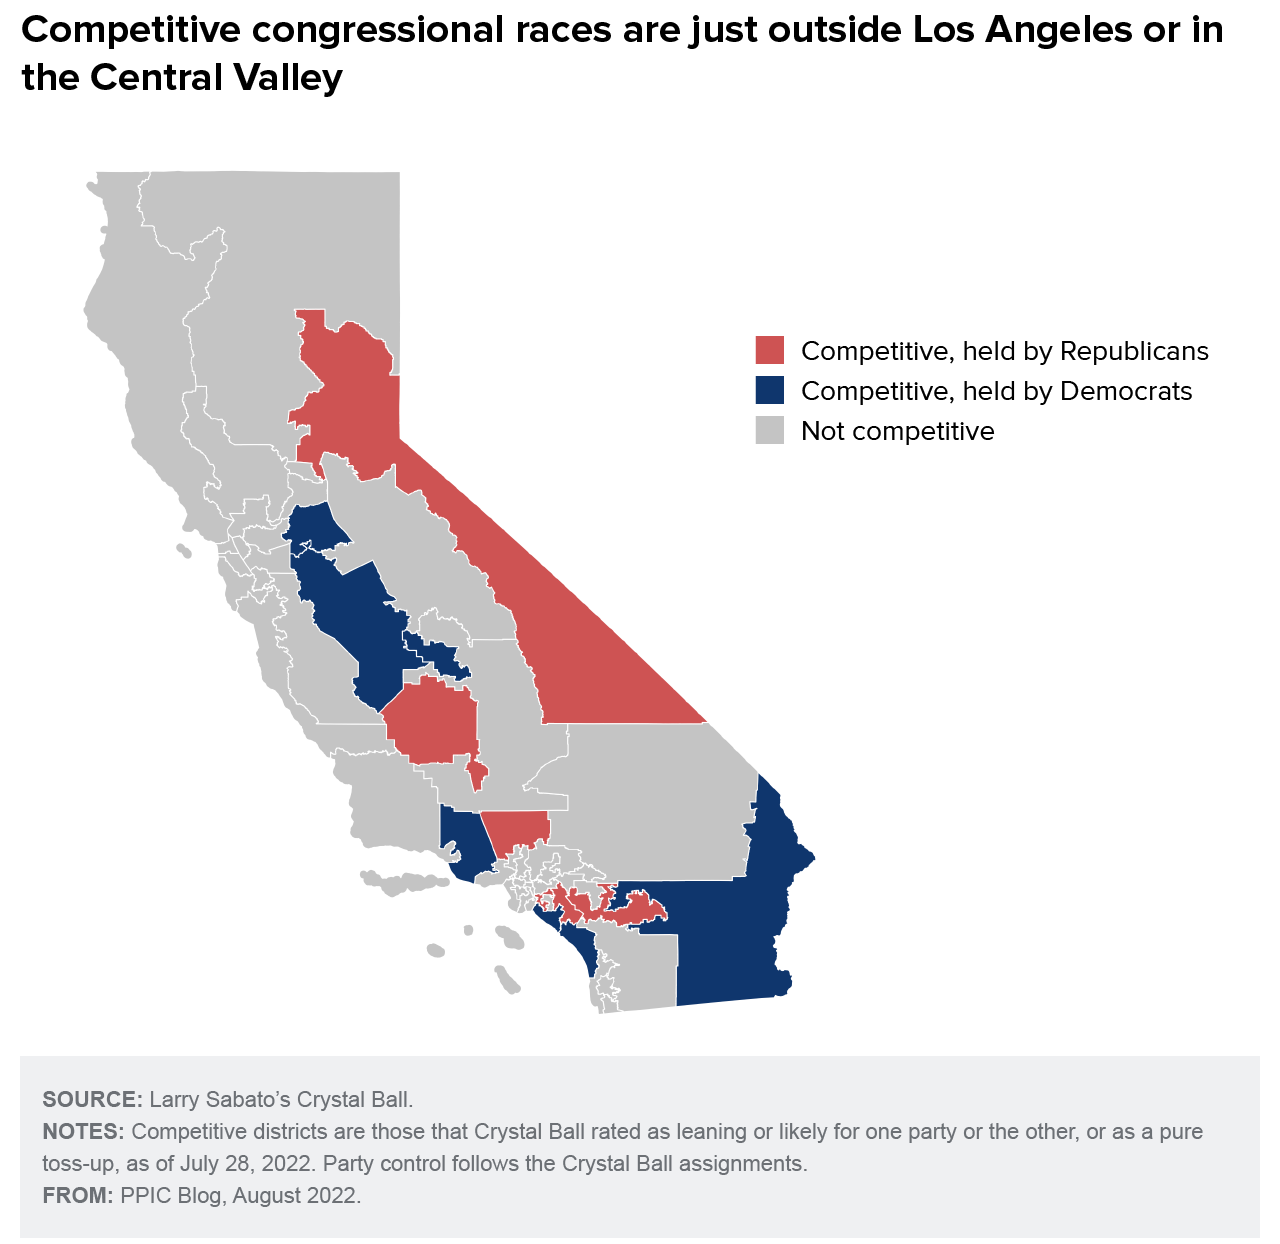 map - Competitive congressional races are just outside Los Angeles or in the Central Valley